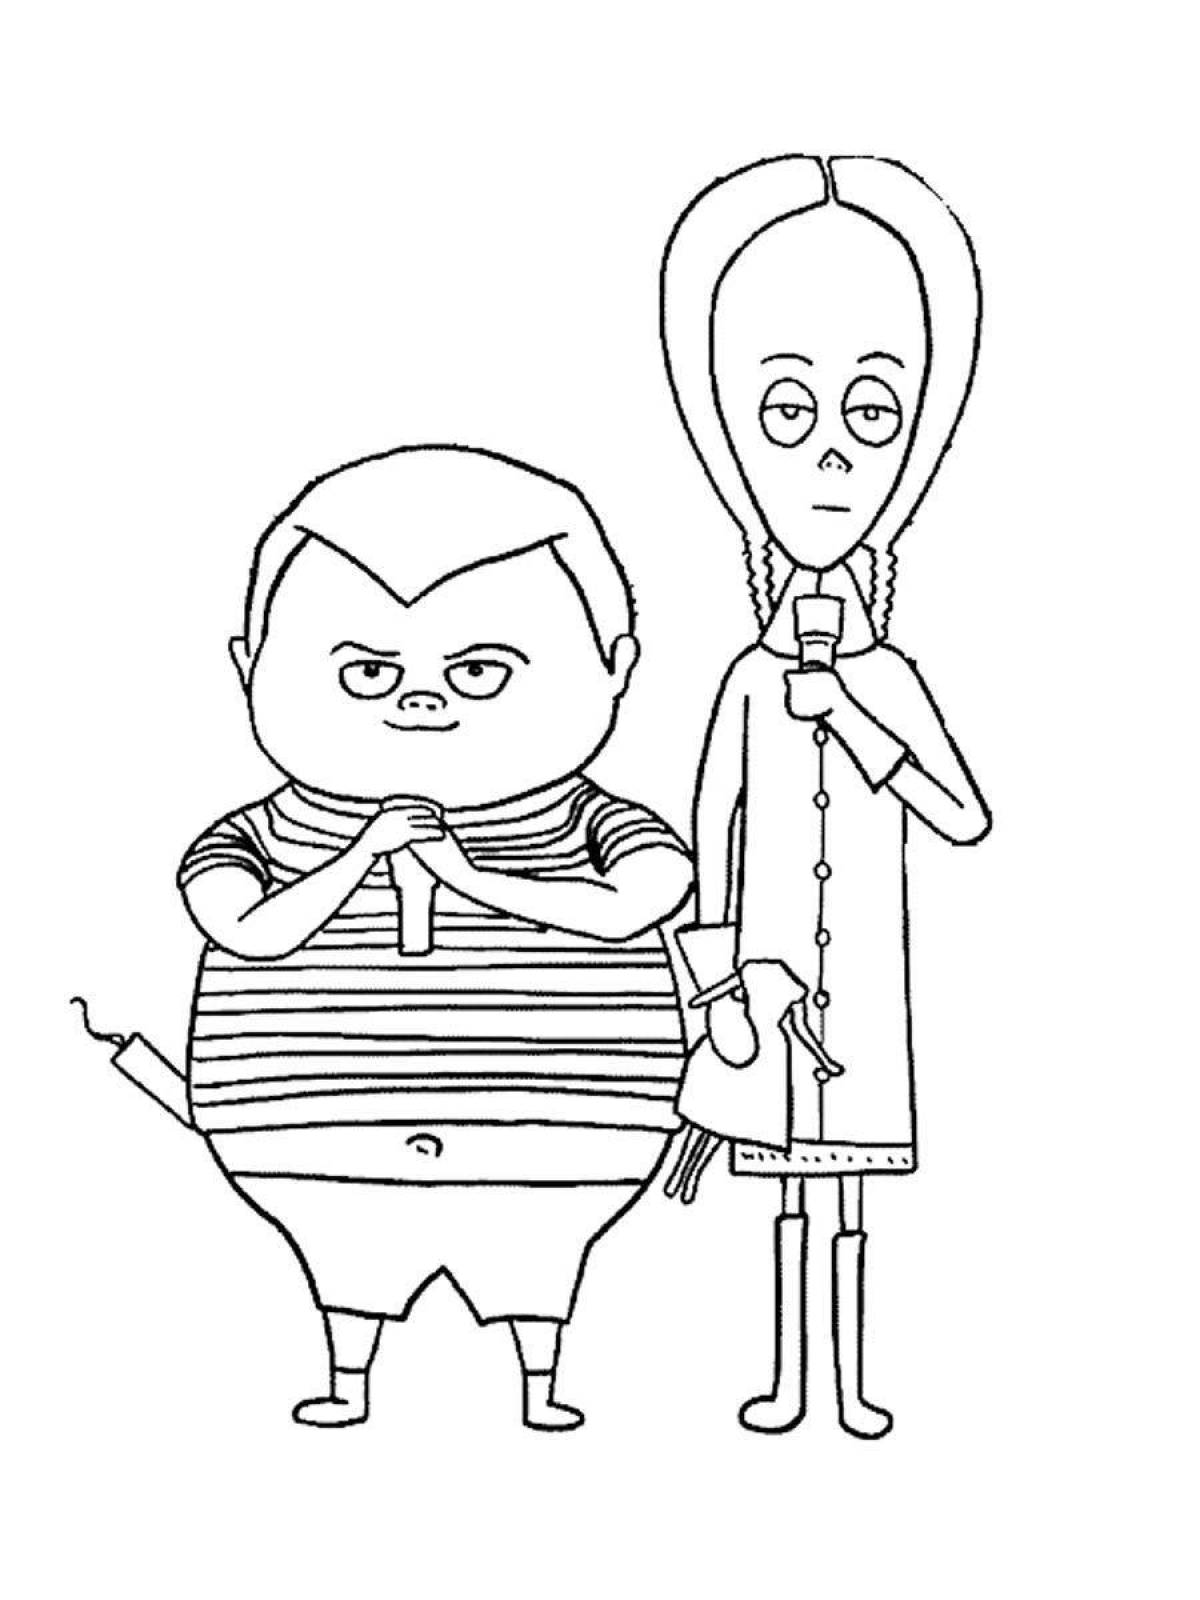 Playful adams family coloring page